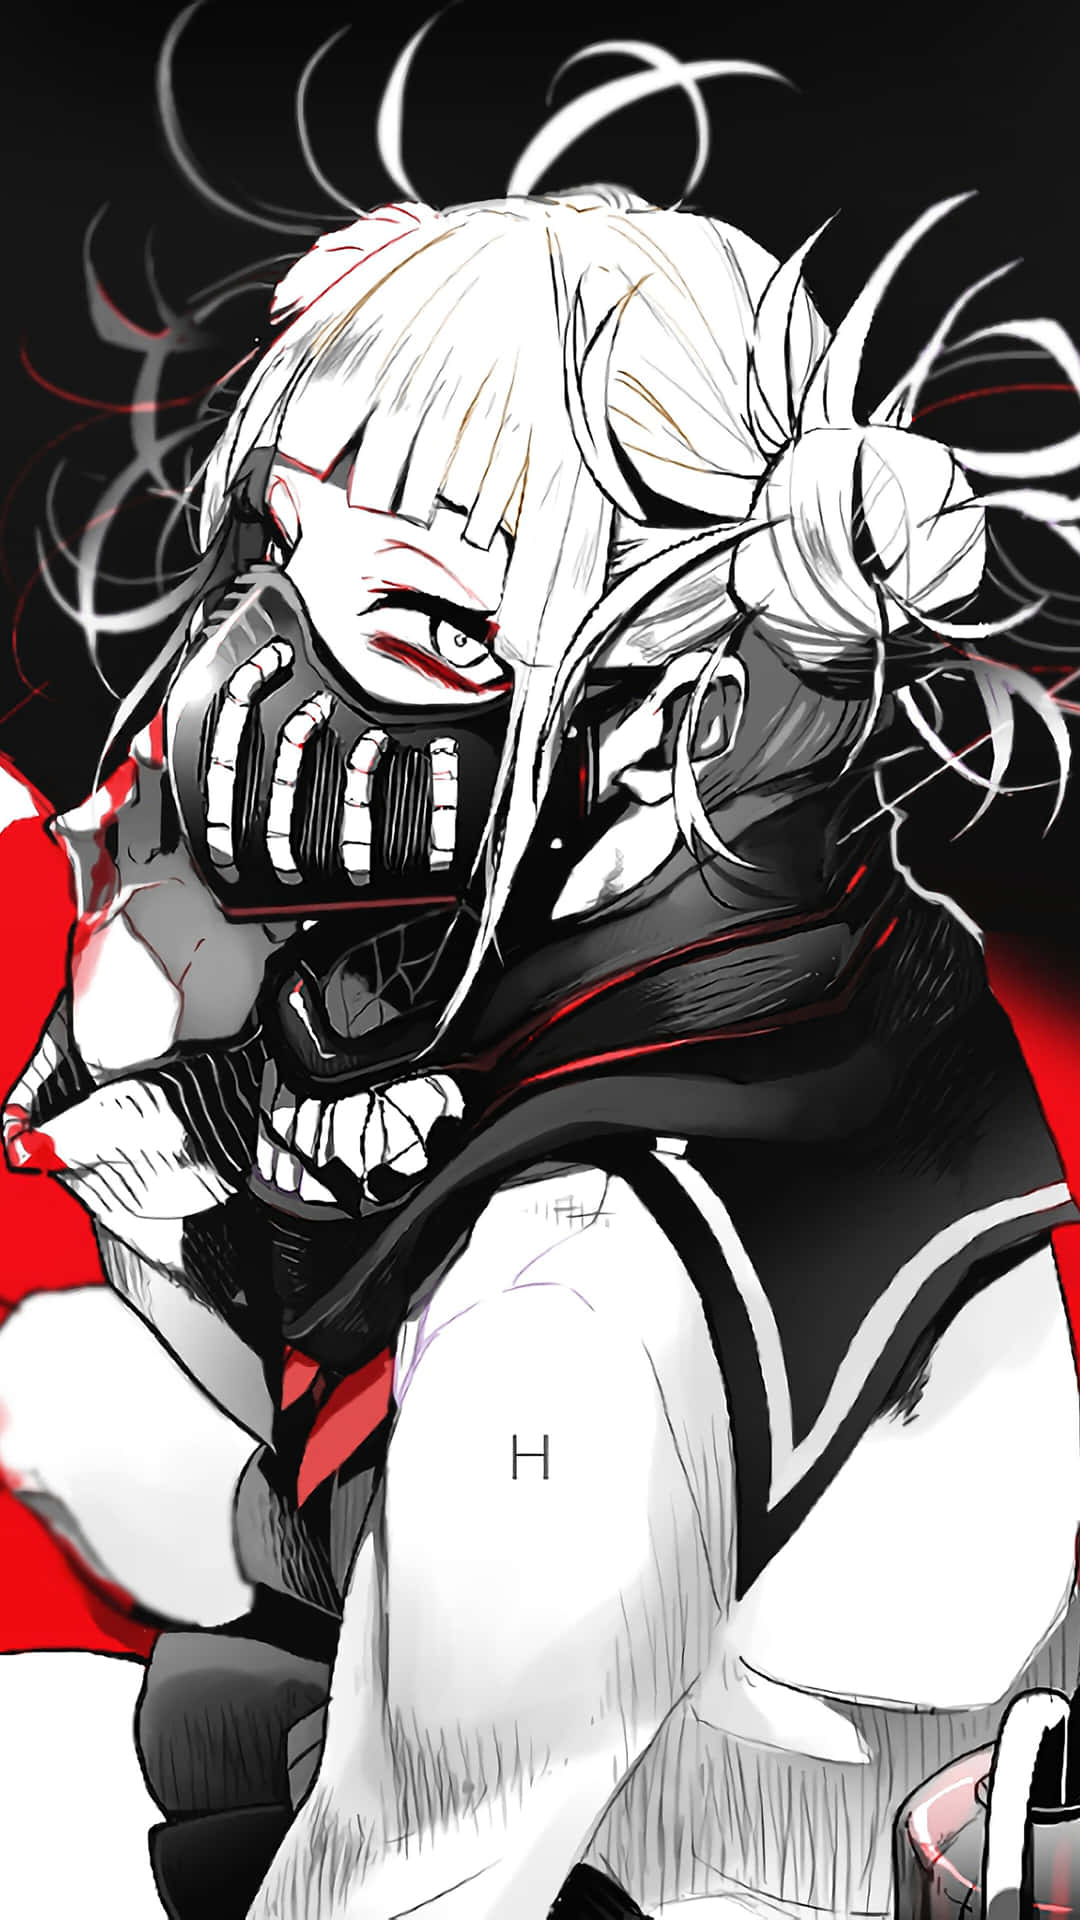 Toga from My Hero Academia seizes up in intense battle! Wallpaper